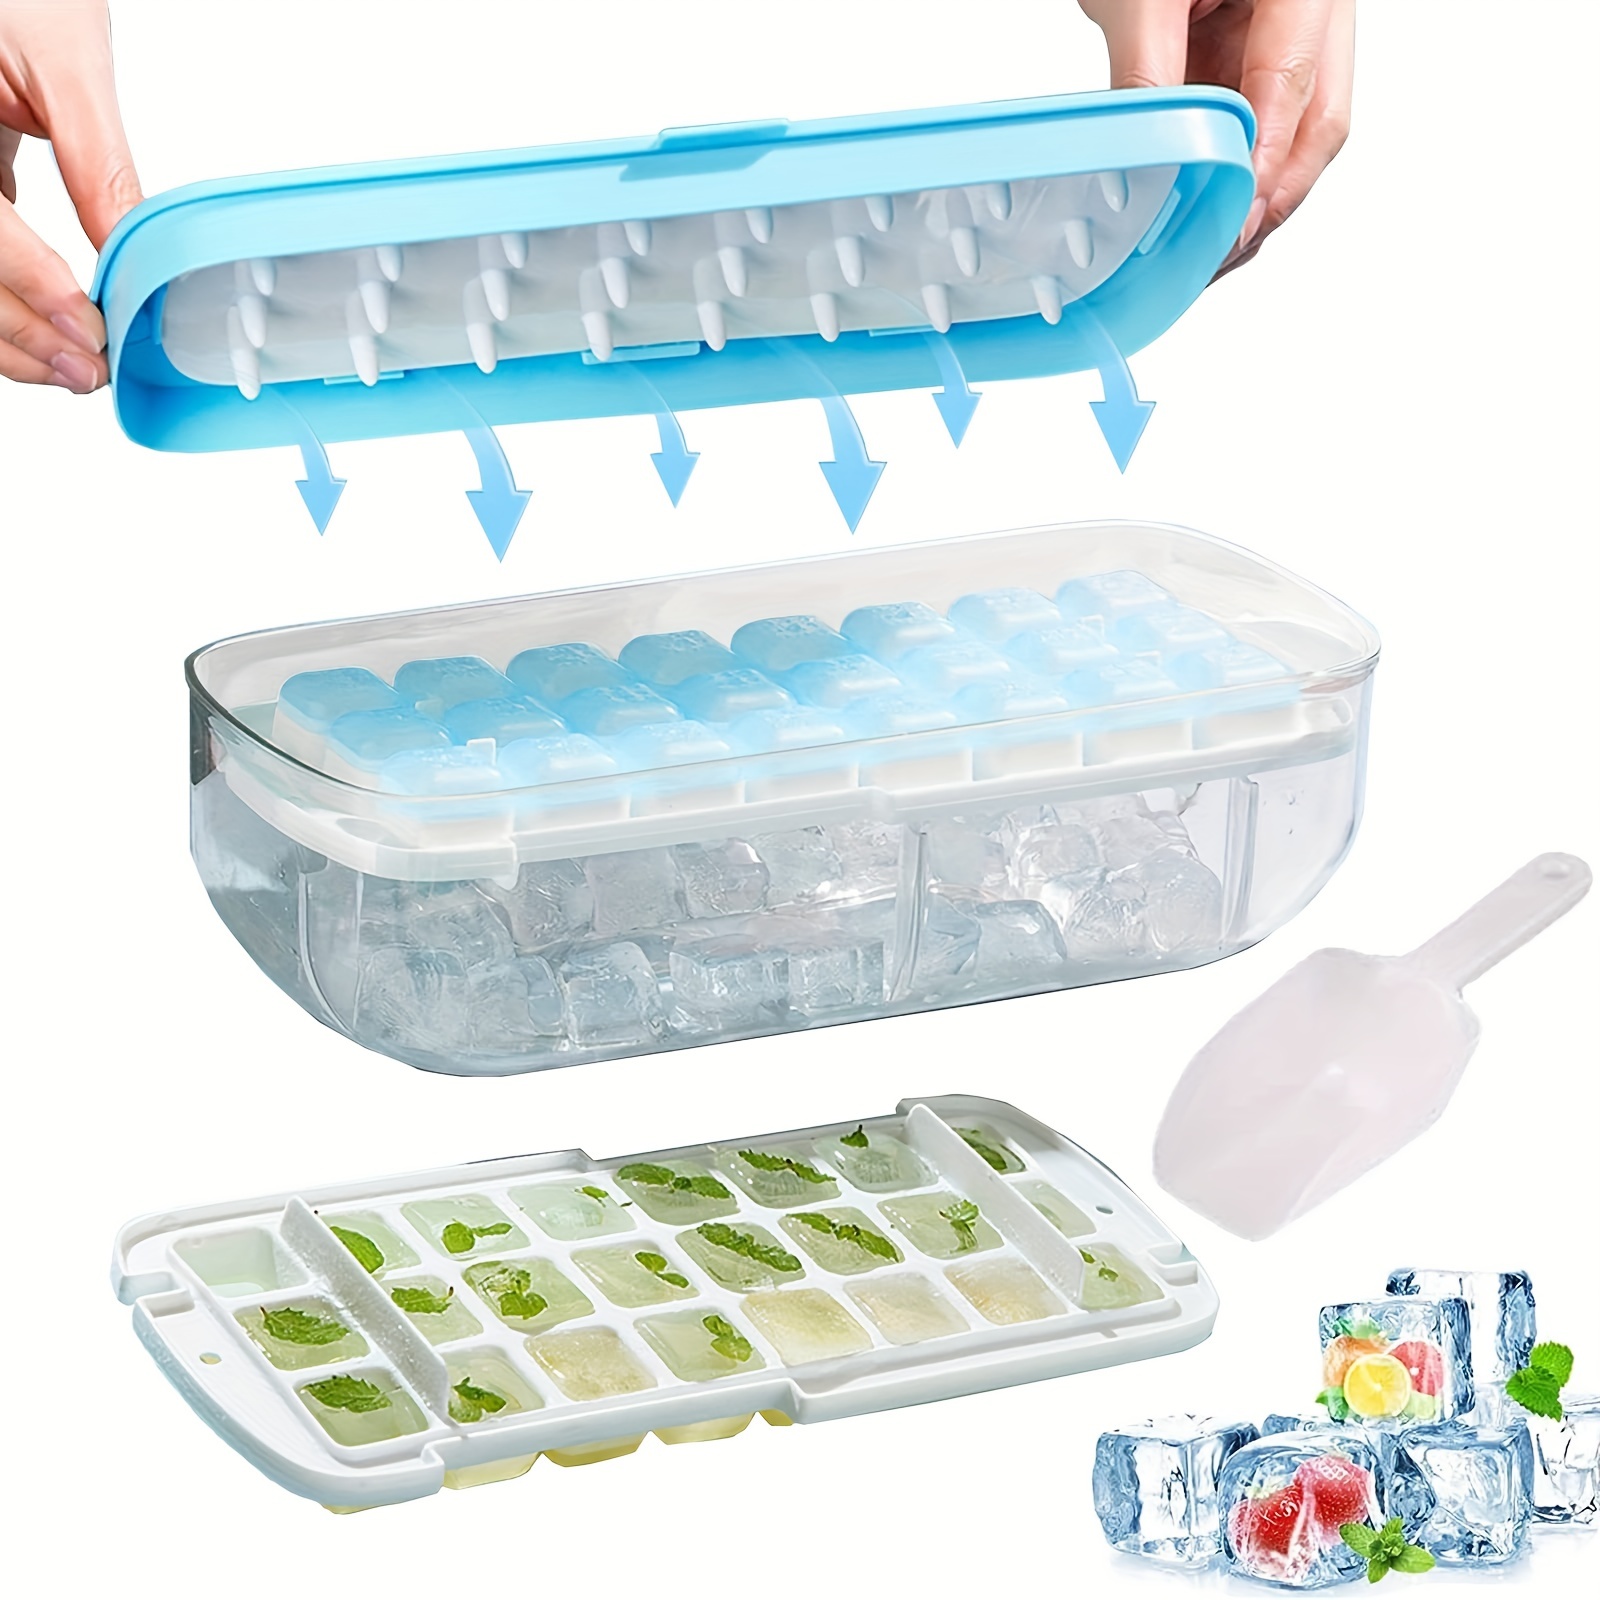 Mini Ice Cube Tray | Silicone Ice Cube Tray with Lid | BPA Free Ice Cube  Maker | Makes 37 Mini Cubes